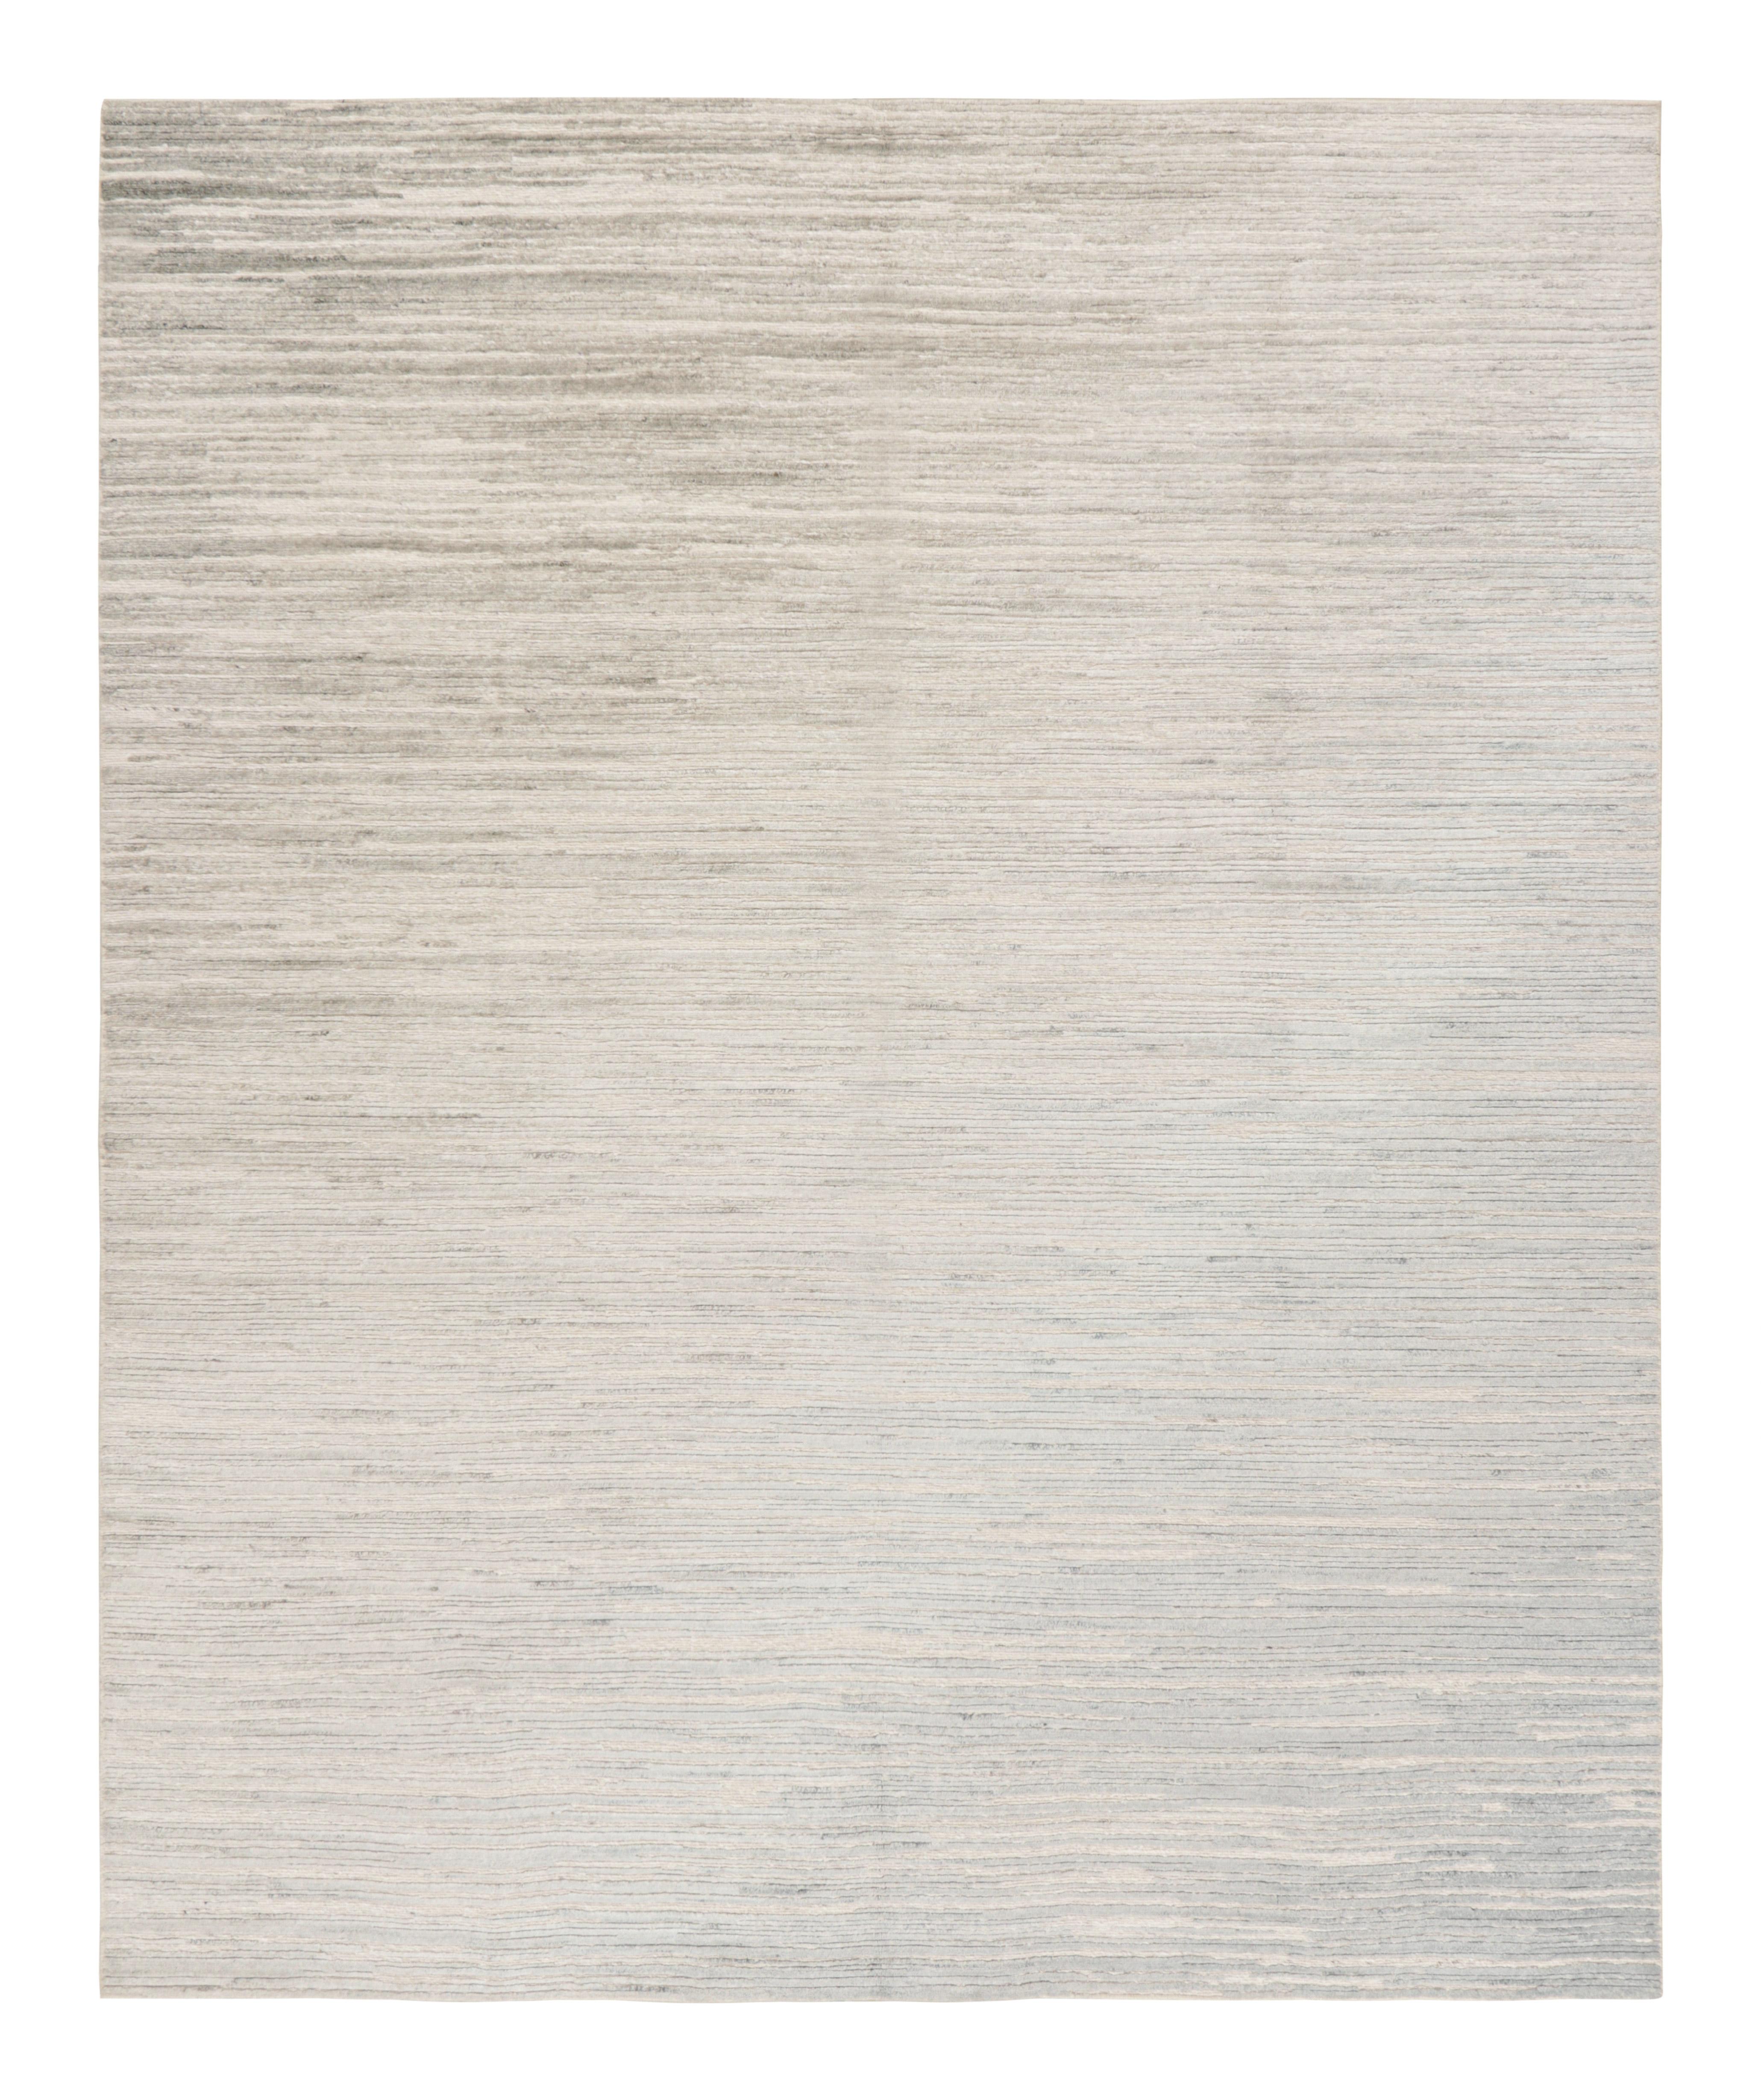 Handwoven in wool, this 8x10 rug represents an exciting new design in the Textural rug collection by Rug & Kilim. 

On the Design: 

Cream white and gray tones underscore a subtle play of high-low texture, married to abstract stripes in a take on